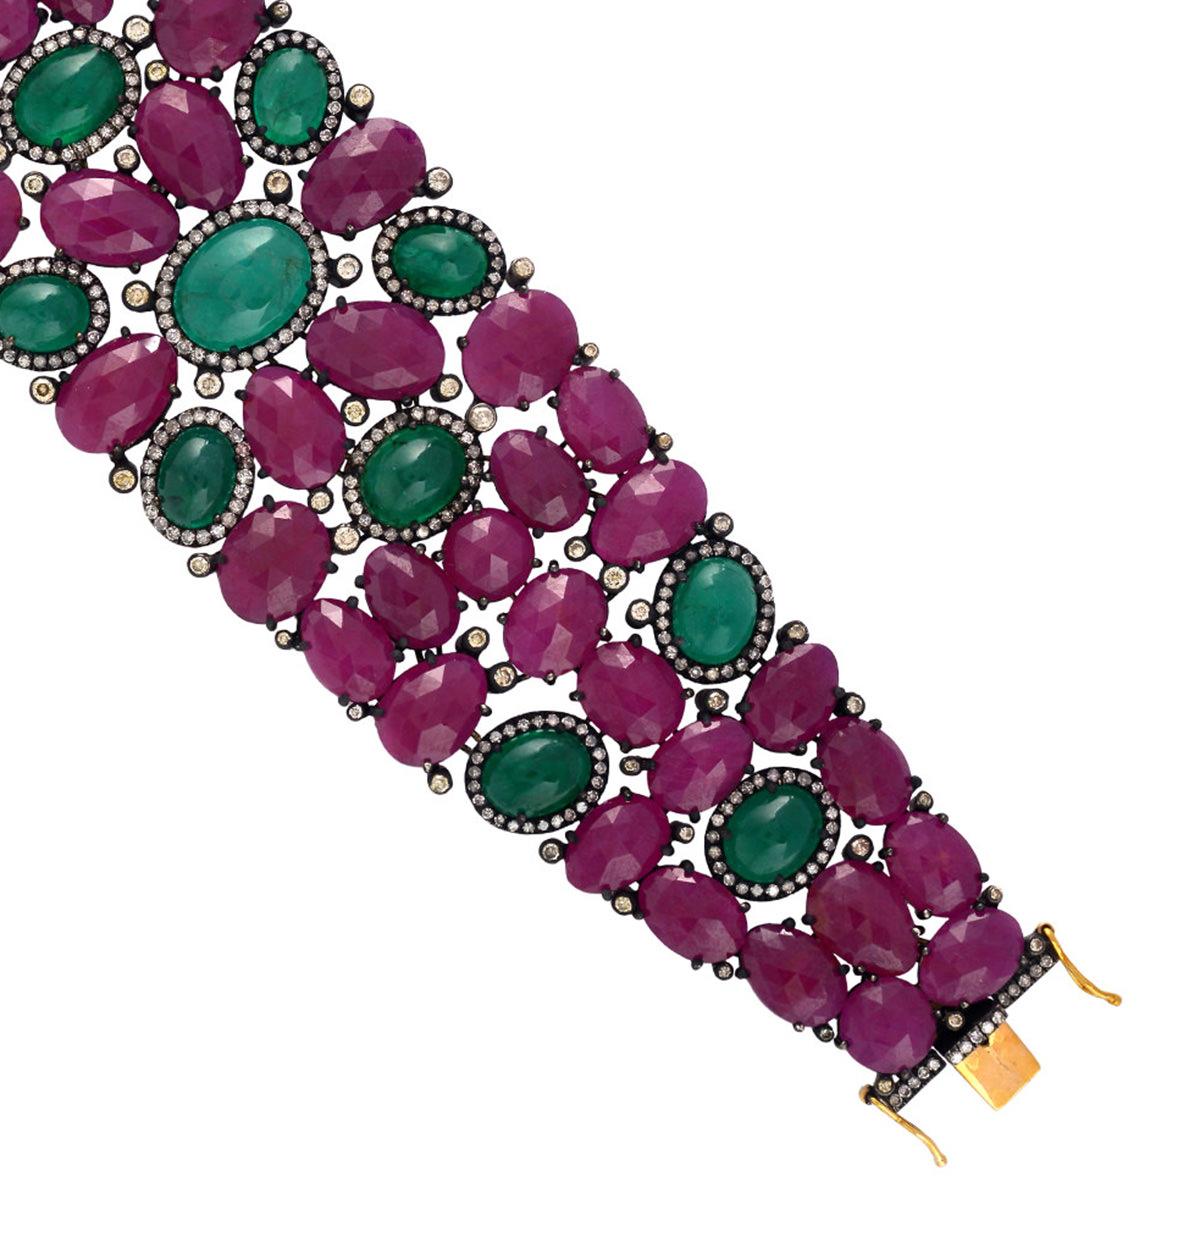 Baroque 139 Carats Natural Ruby Emerald & Diamond Bracelet 18k Gold & Silver In Excellent Condition For Sale In Laguna Niguel, CA